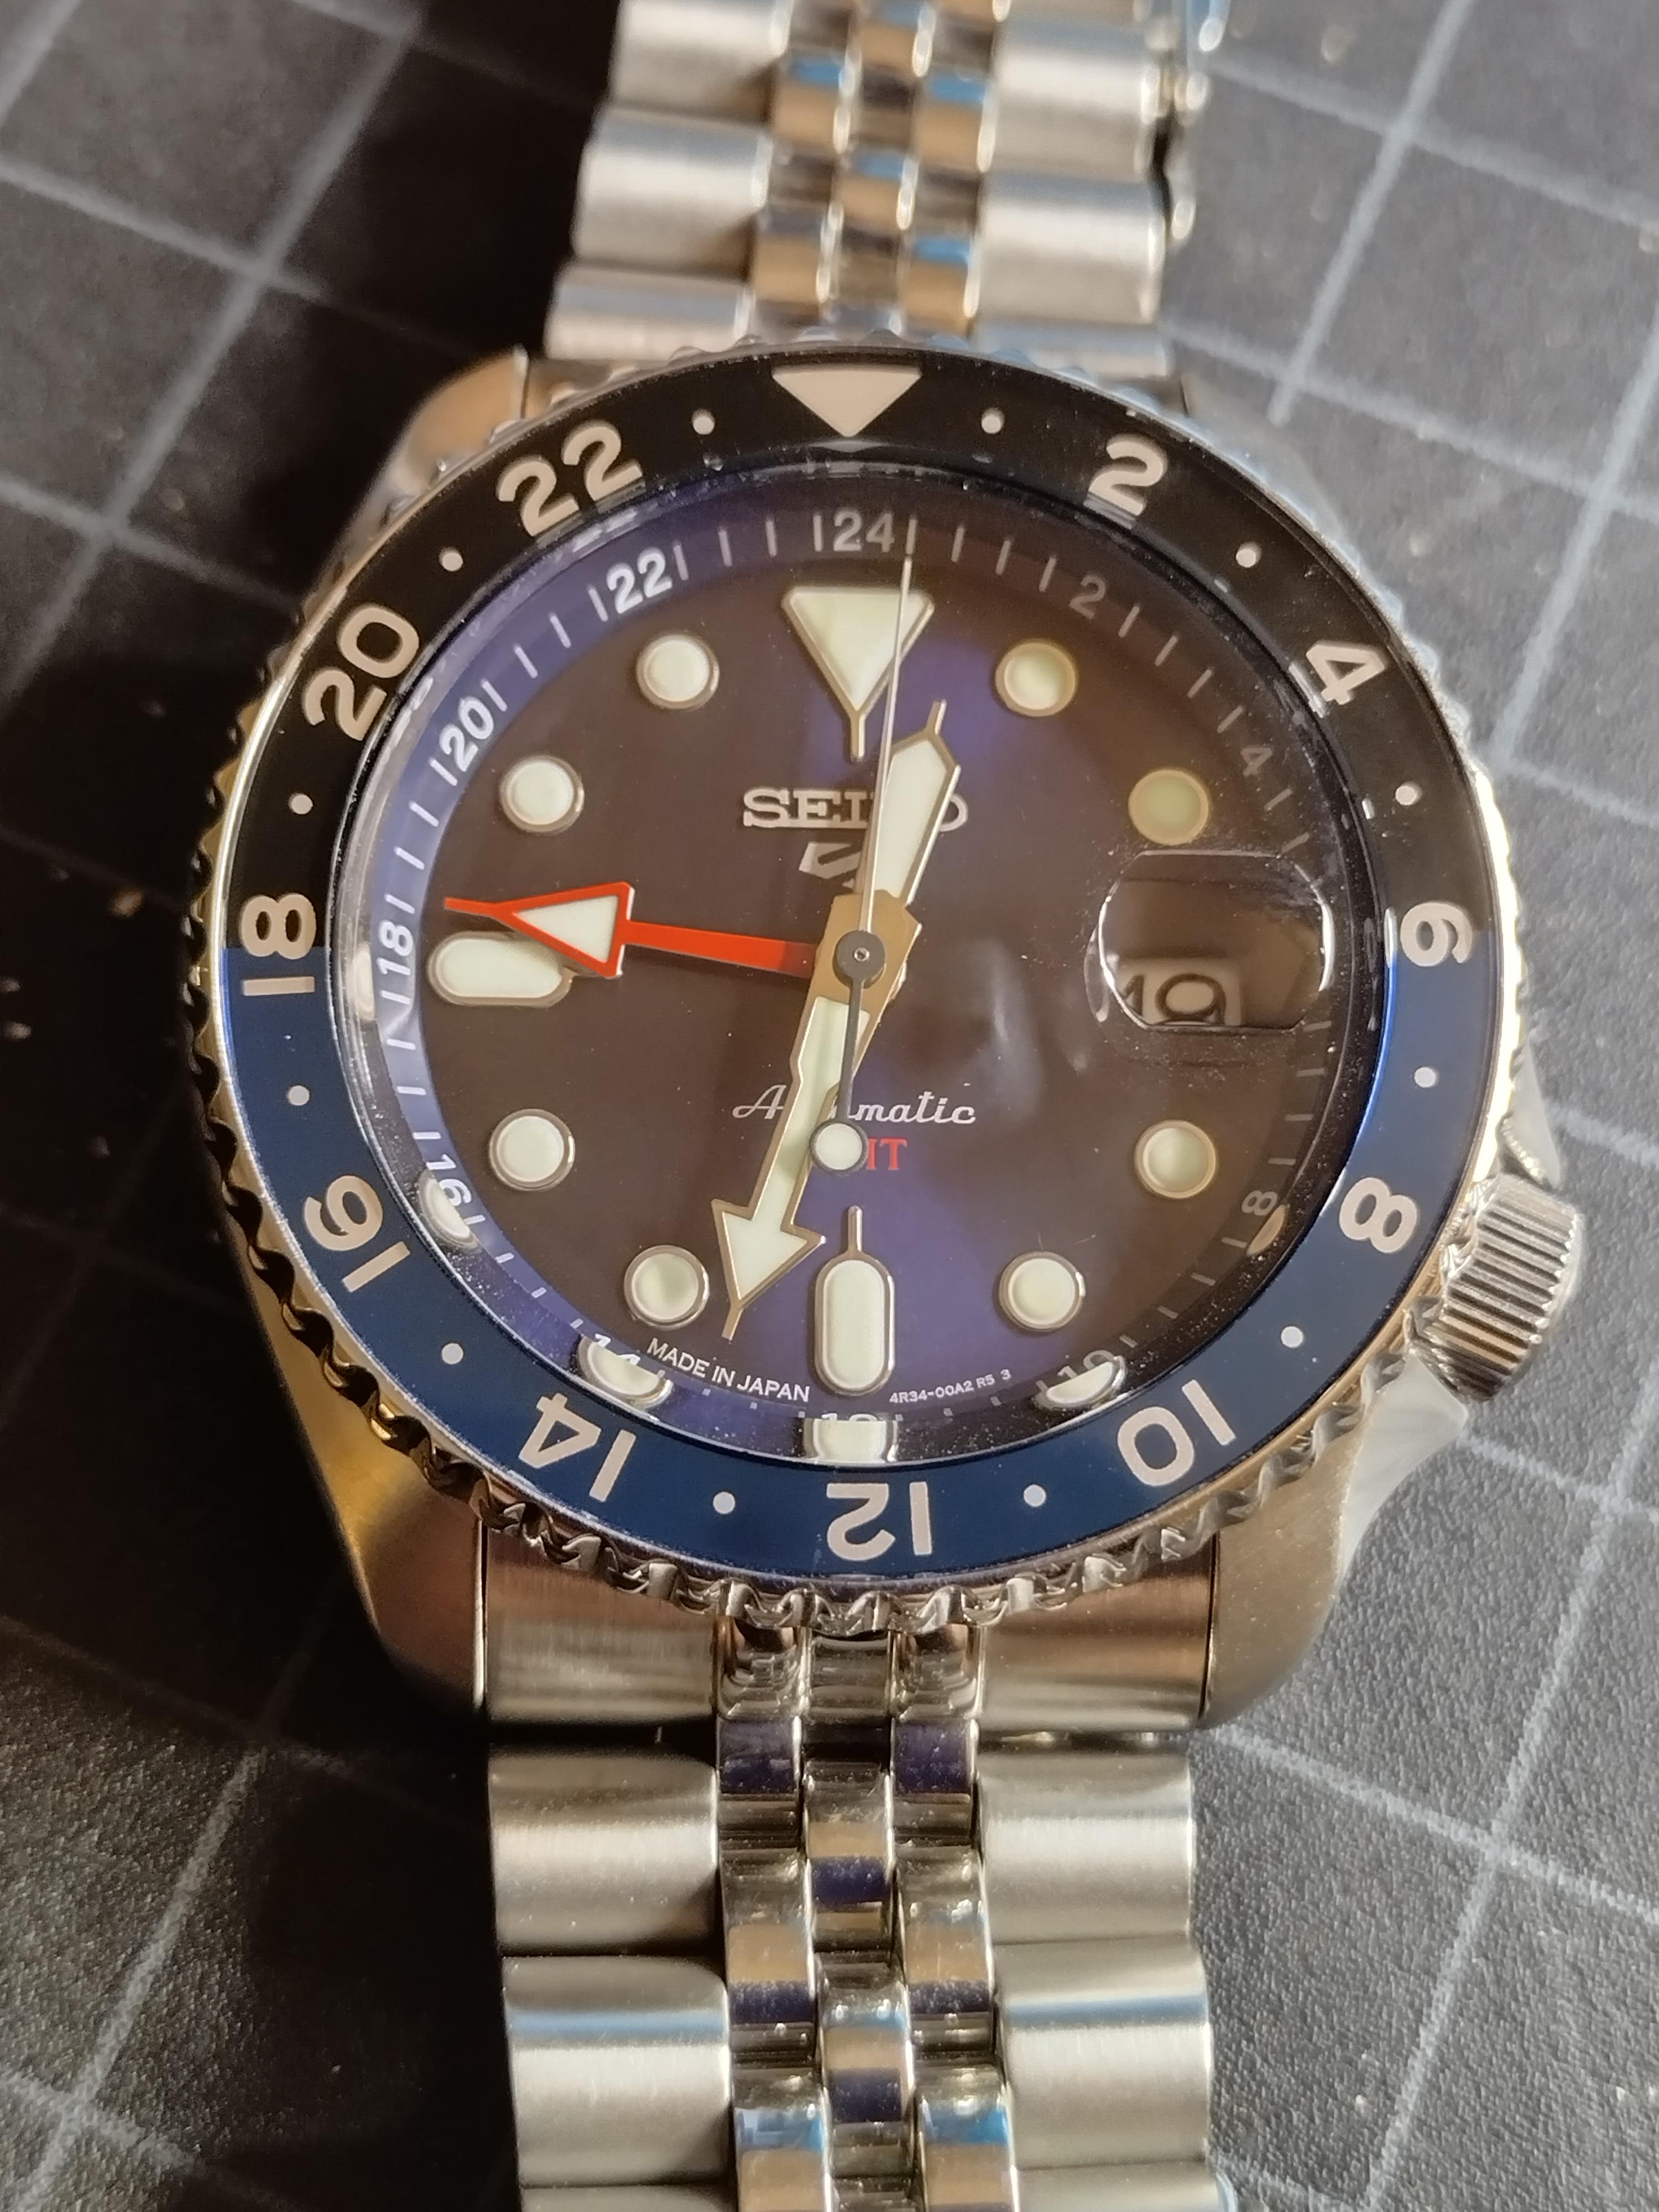 Seiko 4r34 GMT - Your Watch Collection - Watch Repair Talk